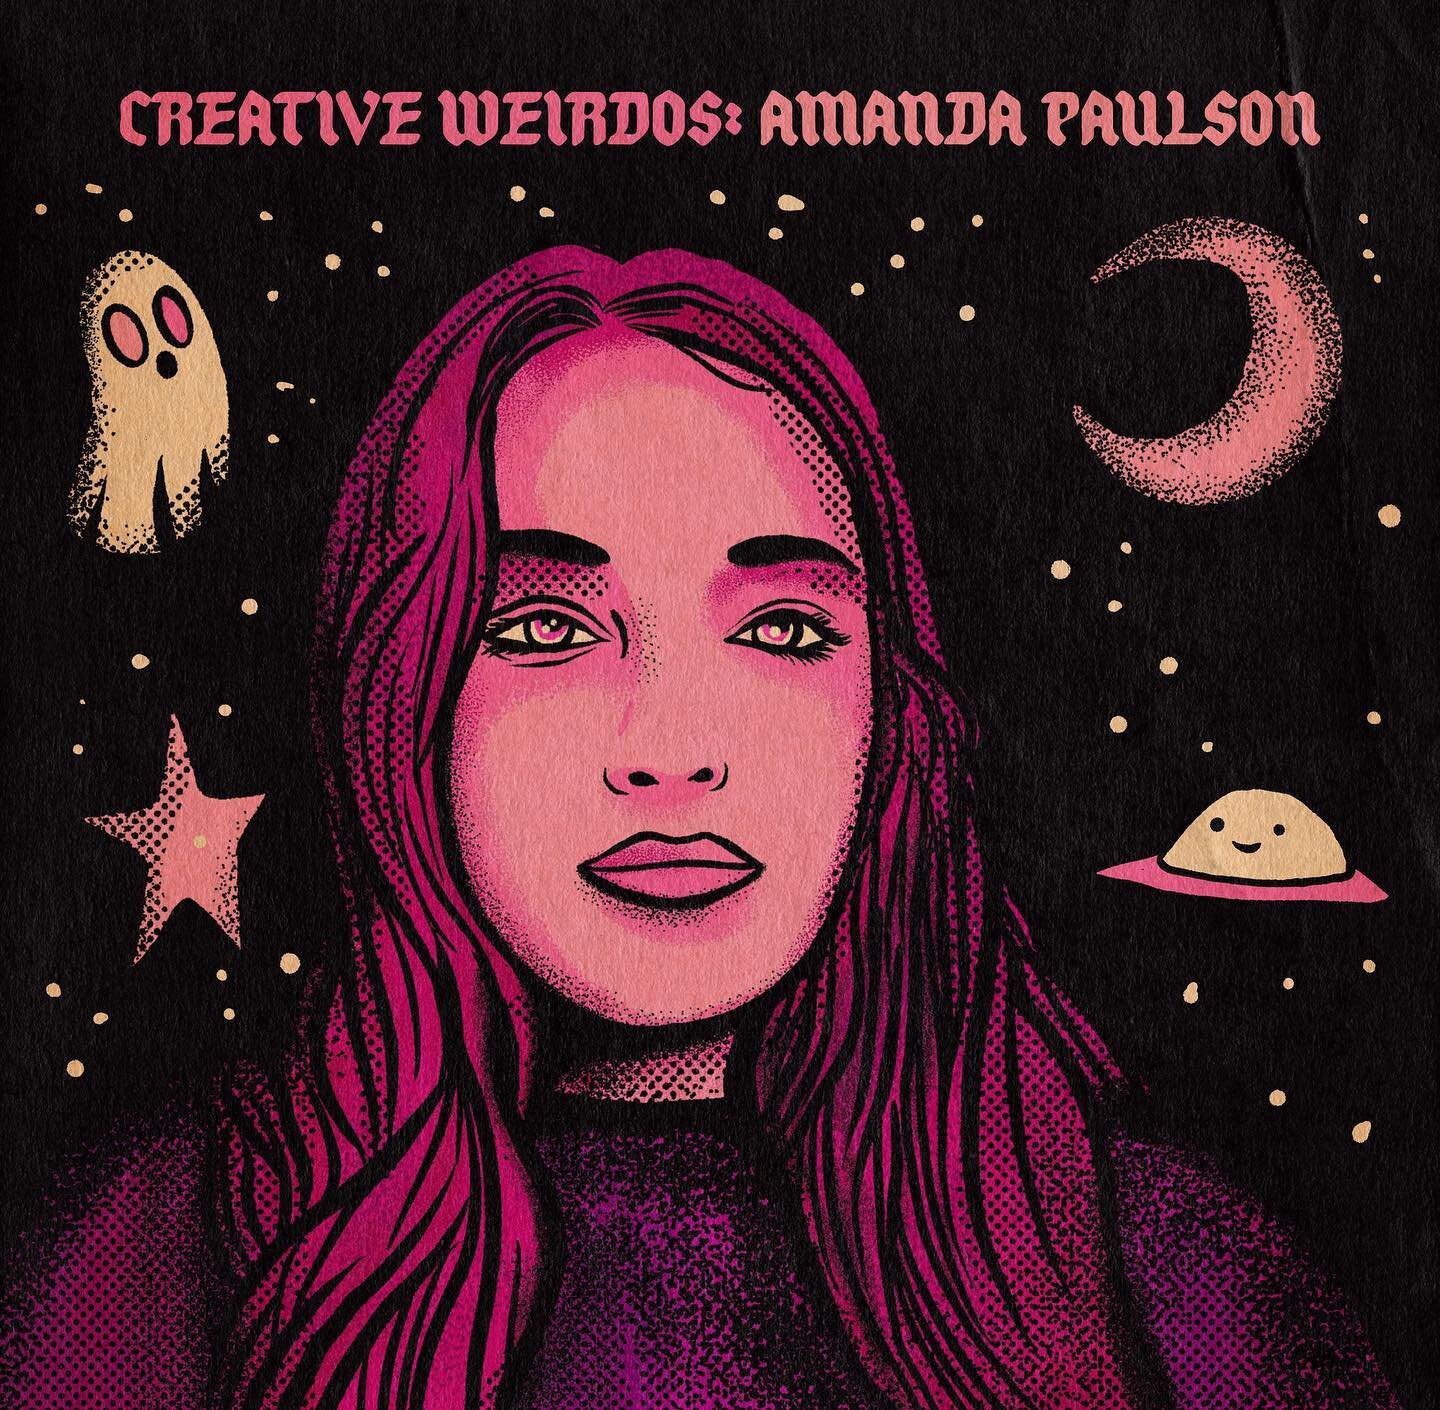 Creative Weirdos: Amanda Paulson 👻

It&rsquo;s Saturday which means it&rsquo;s time for another episode of Creative Weirdos! I&rsquo;m super excited to share this chat with the amazing @prettyfnspooky. We talk about a bit of everything from religion